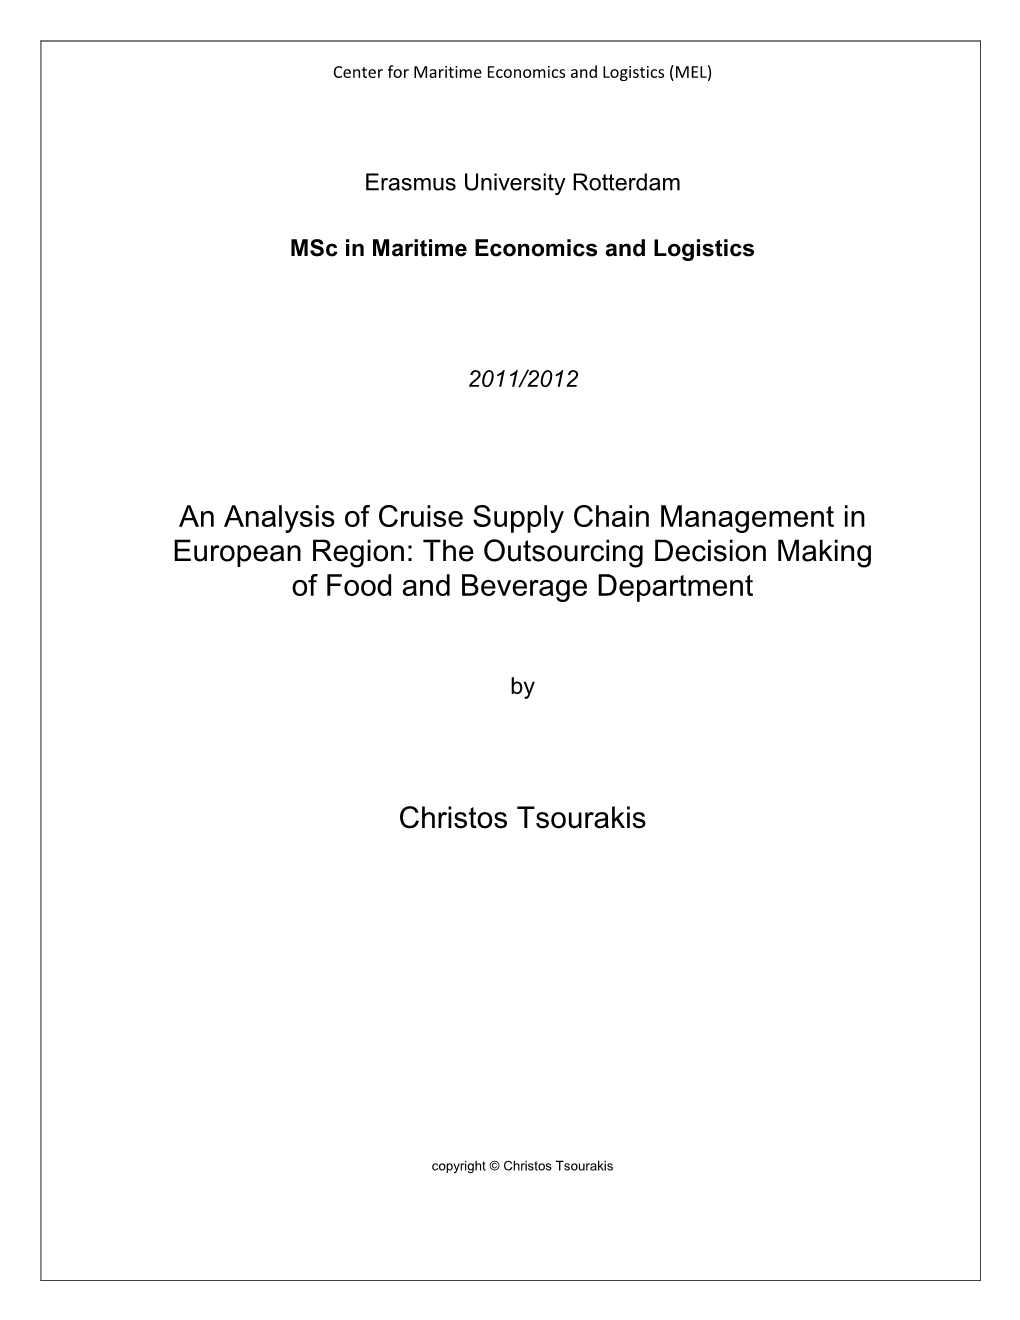 An Analysis of Cruise Supply Chain Management in European Region: the Outsourcing Decision Making of Food and Beverage Department